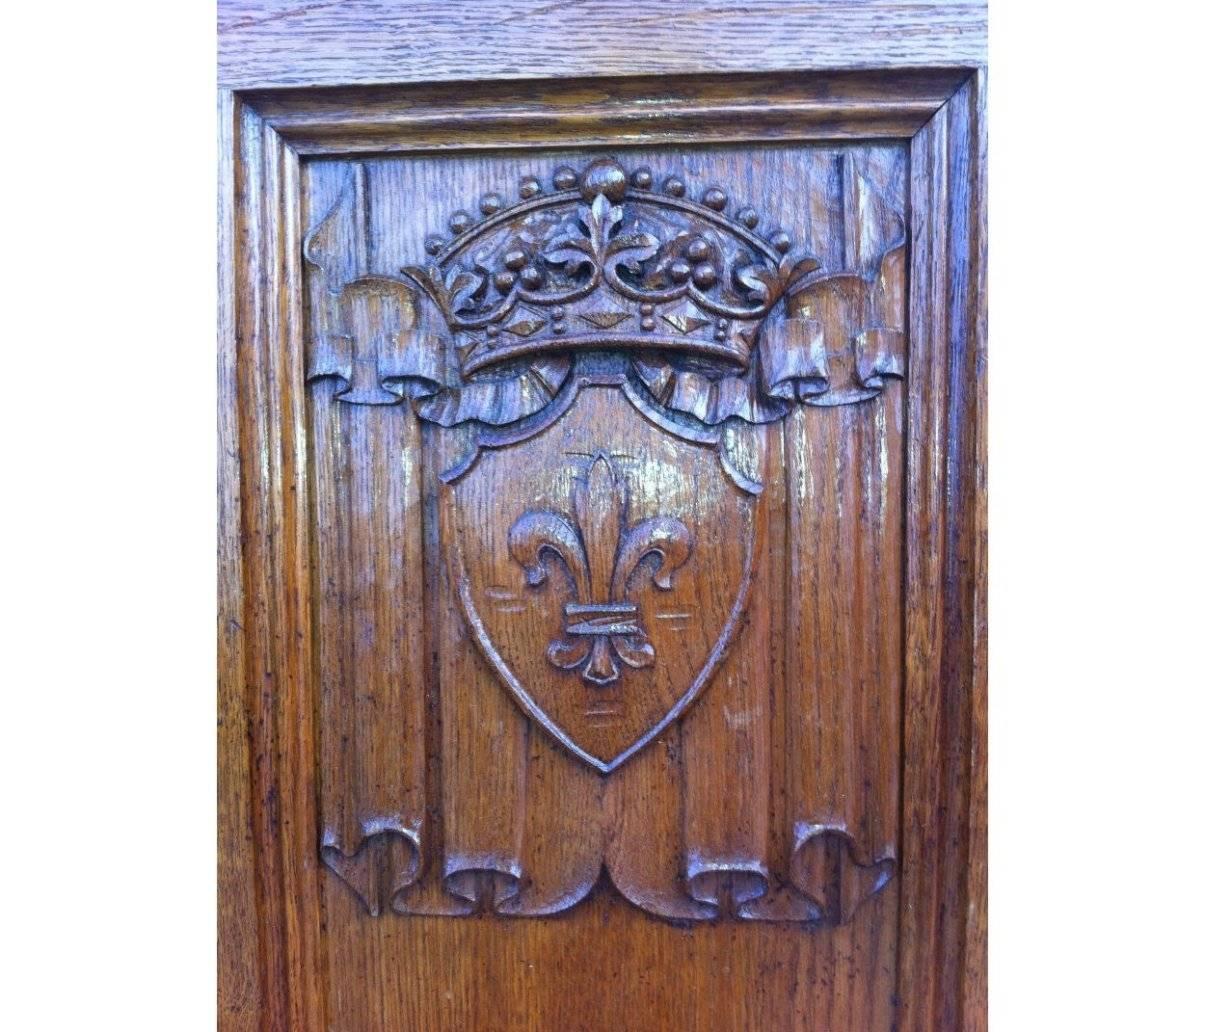 Oak Panelling from The Supreme High Court, opposite The Houses Of Parliament. London